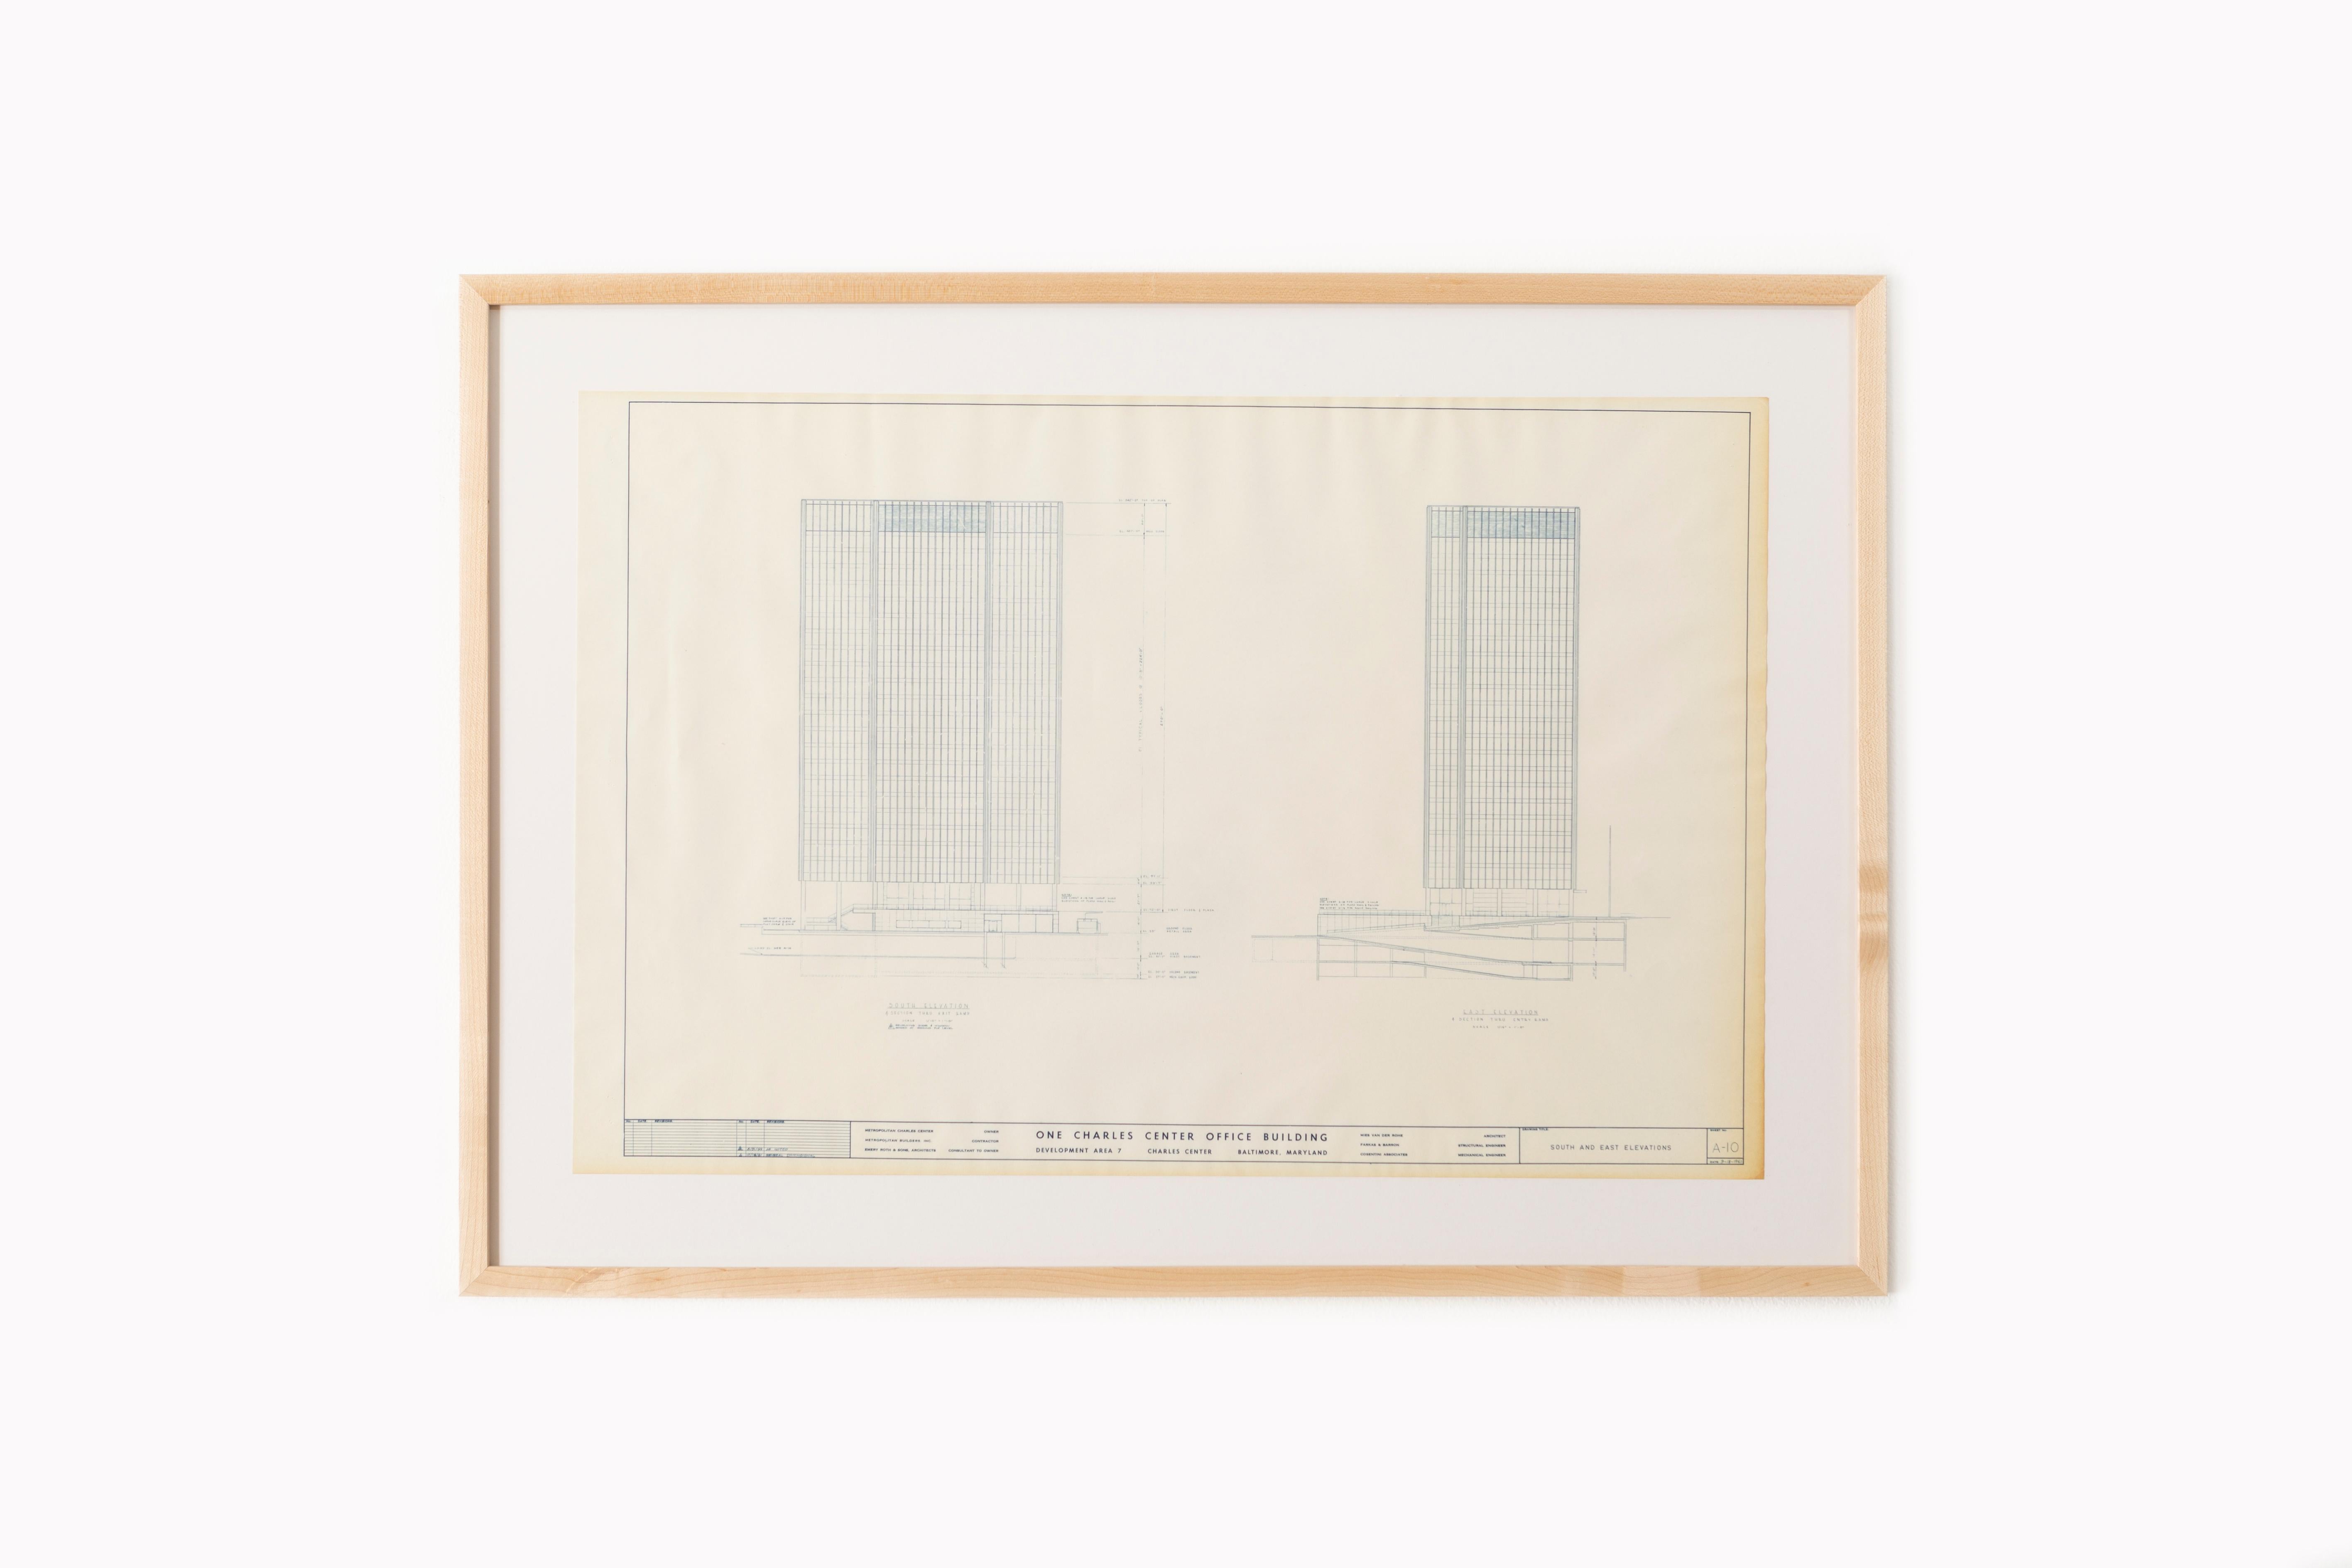 Mies van der Rohe Blueprint, 4000 N. Charles Baltimore, 1964, Lower Levels For Sale 5